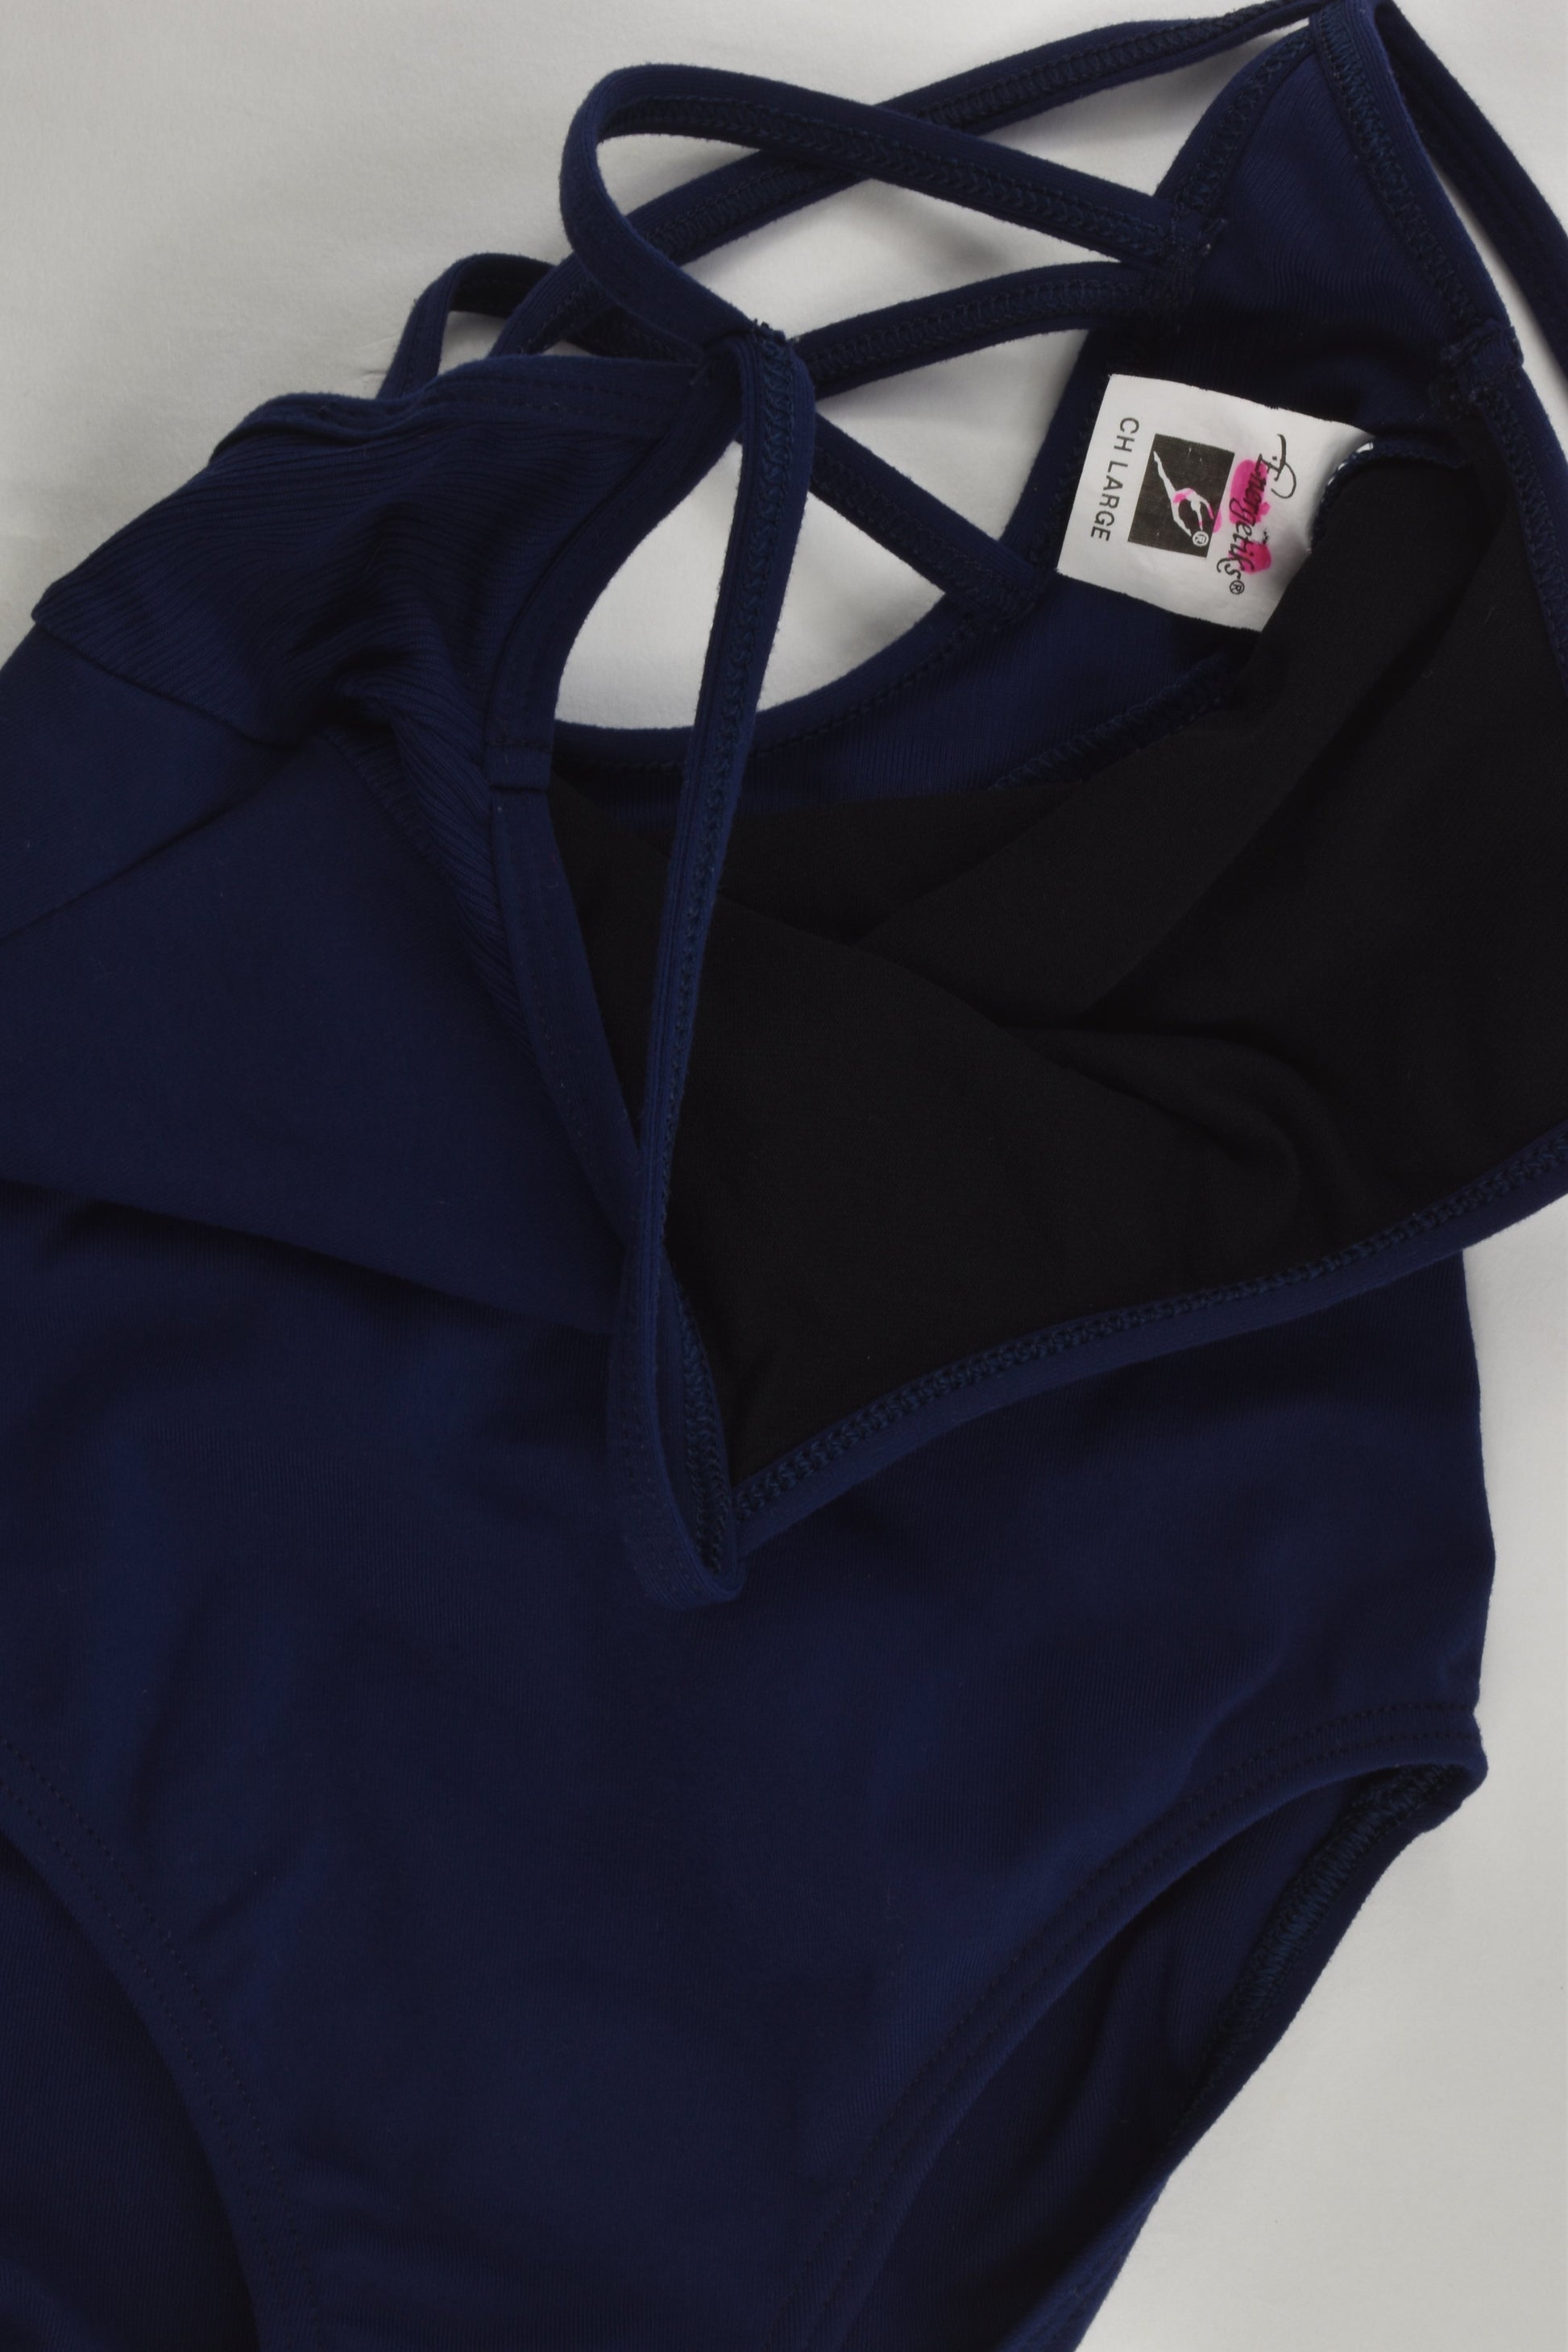 Energetiks Size approx 8-10 (Large) Lined Navy Leotard